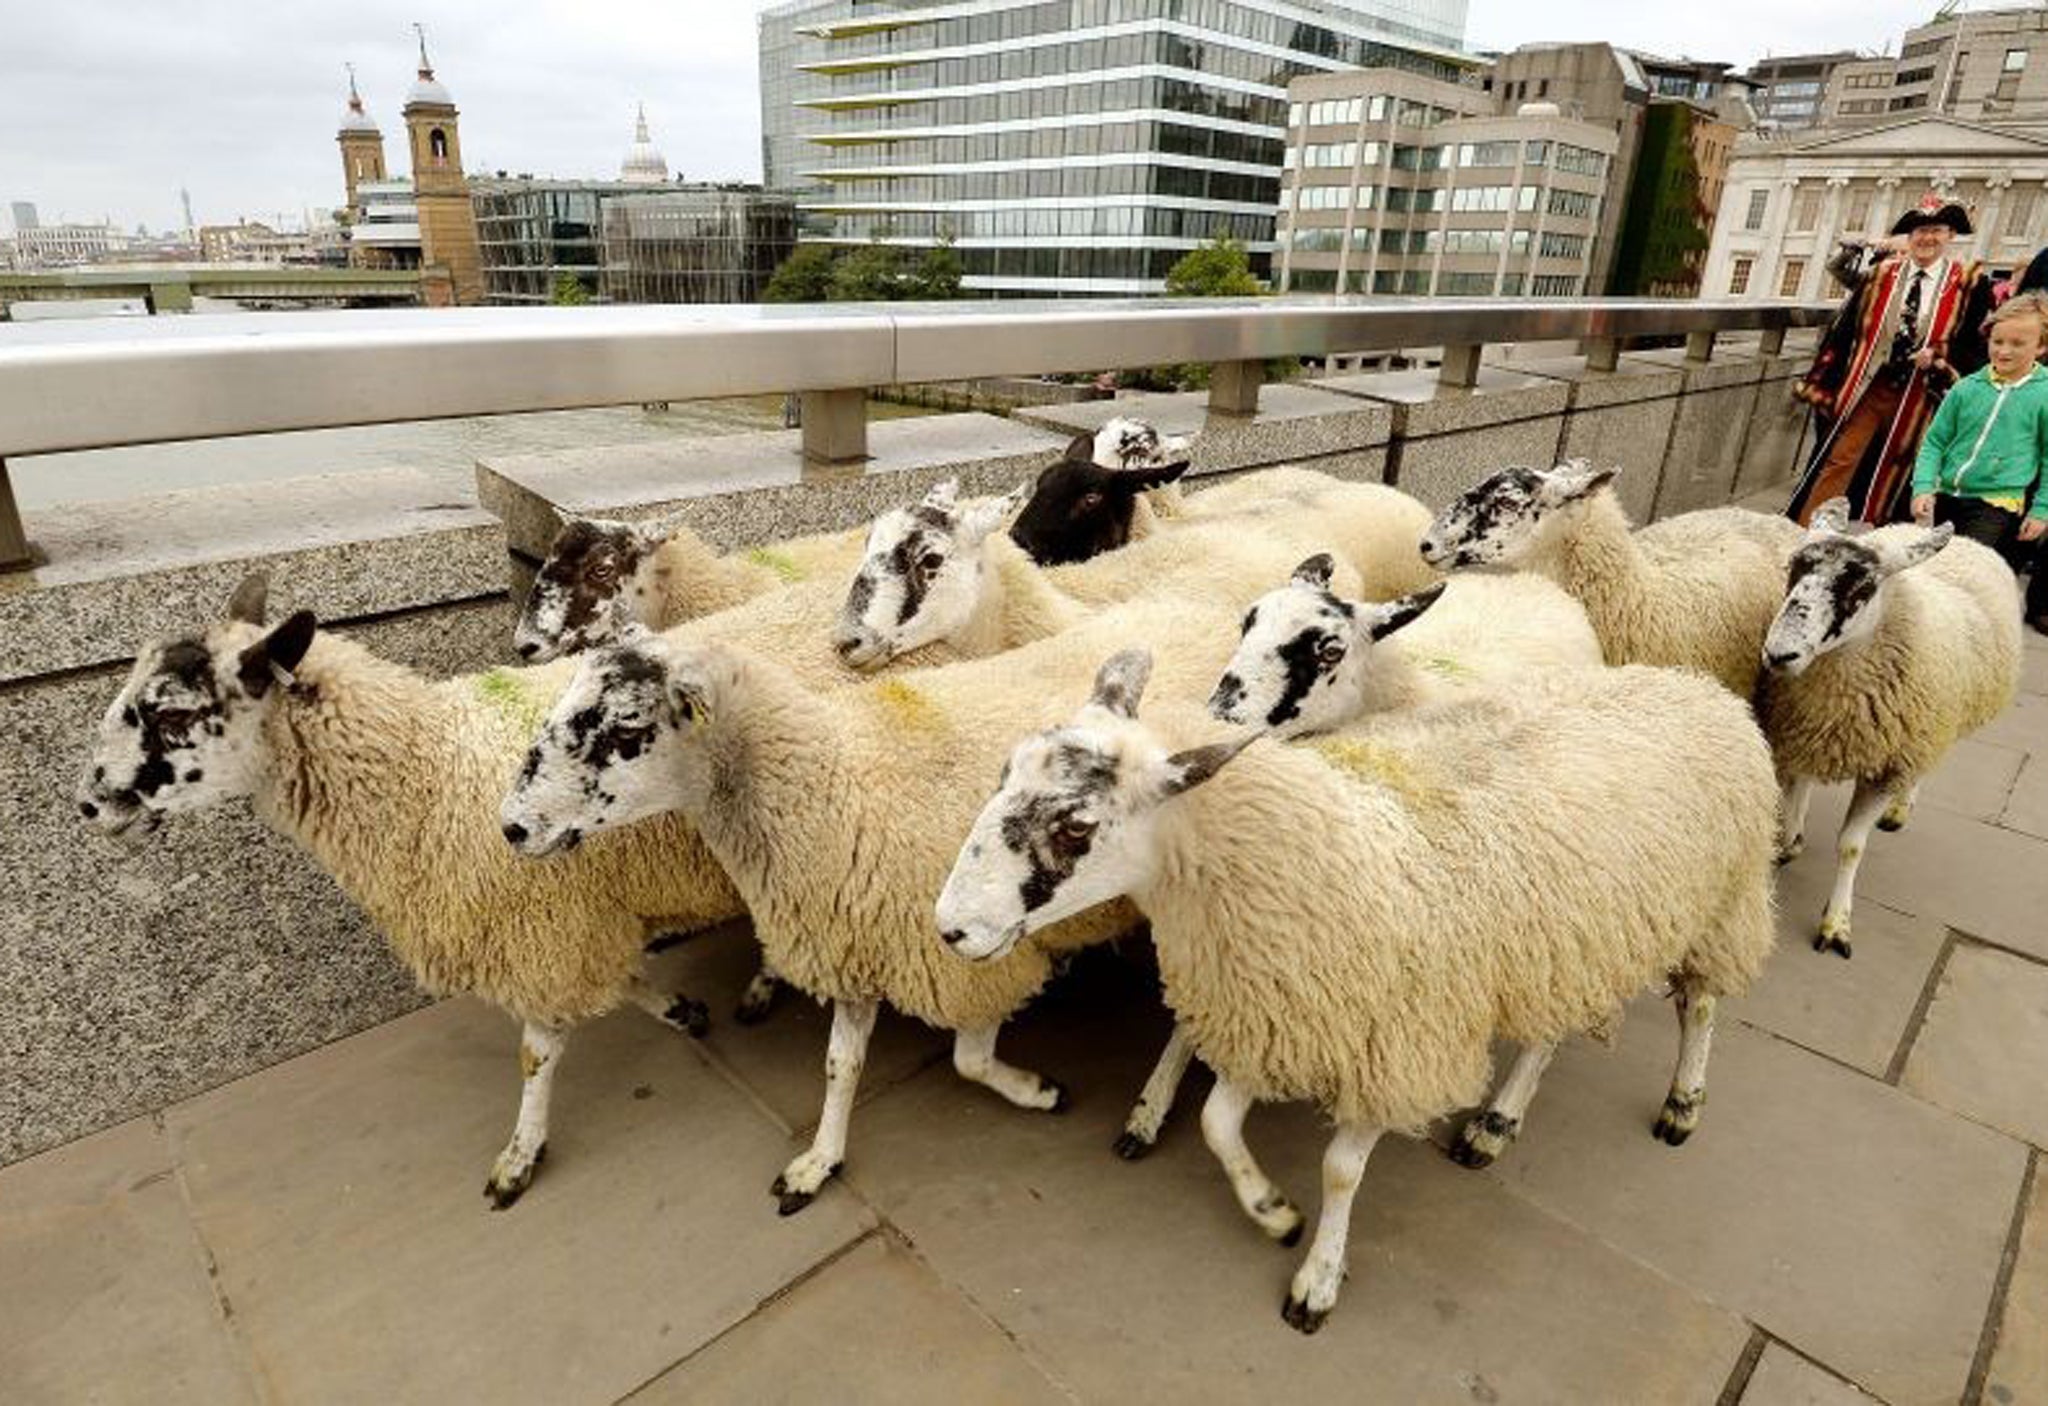 Traffic was redirected and commando squadron officers were on patrol as 20 Suffolk and Texel sheep were escorted across London Bridge